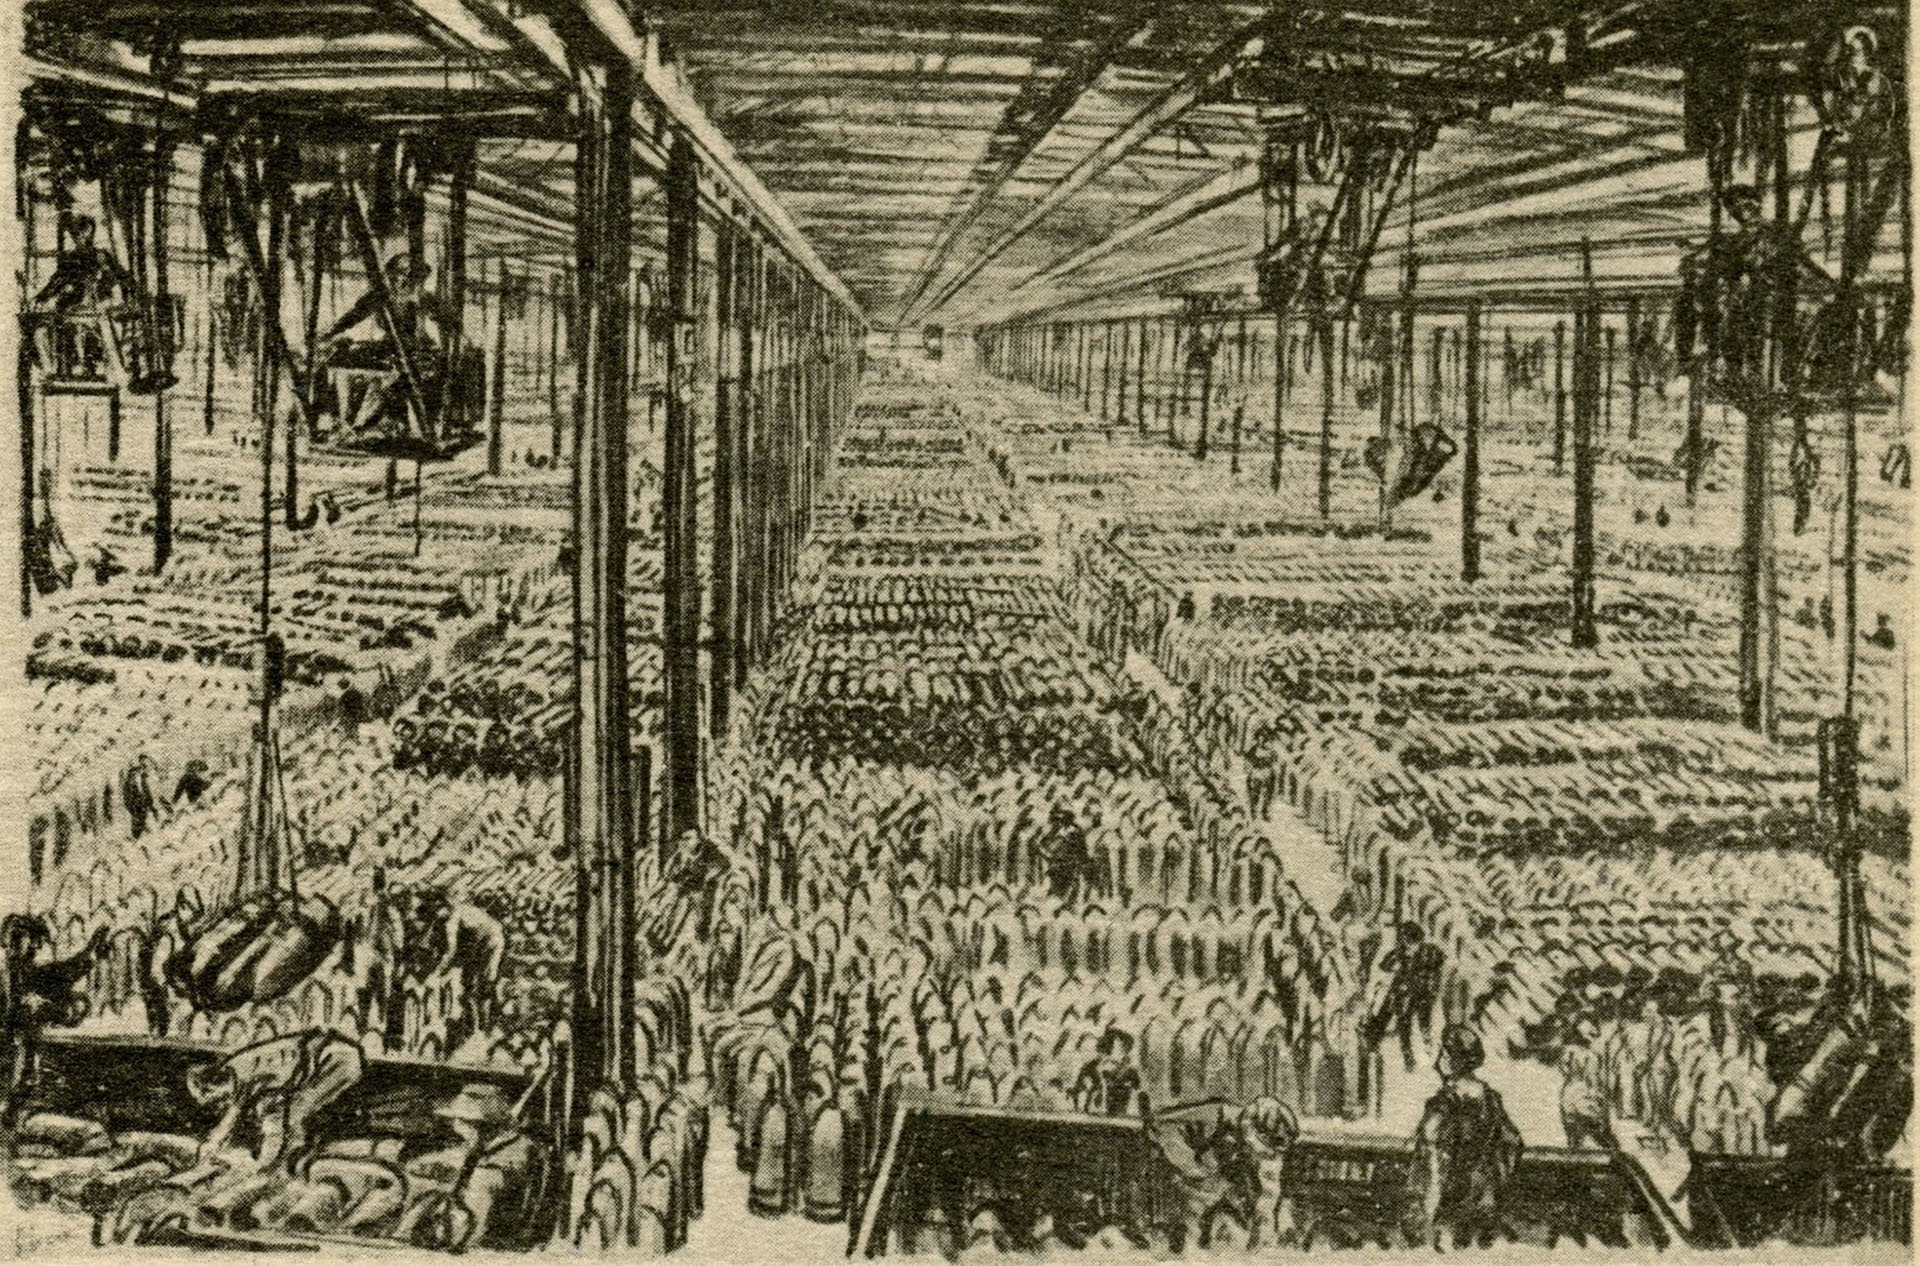 Chilwell Filling Factory, Nottingham, this sketch by the war artist Muirhead Bone shows filled shelled being loaded into railway wagons